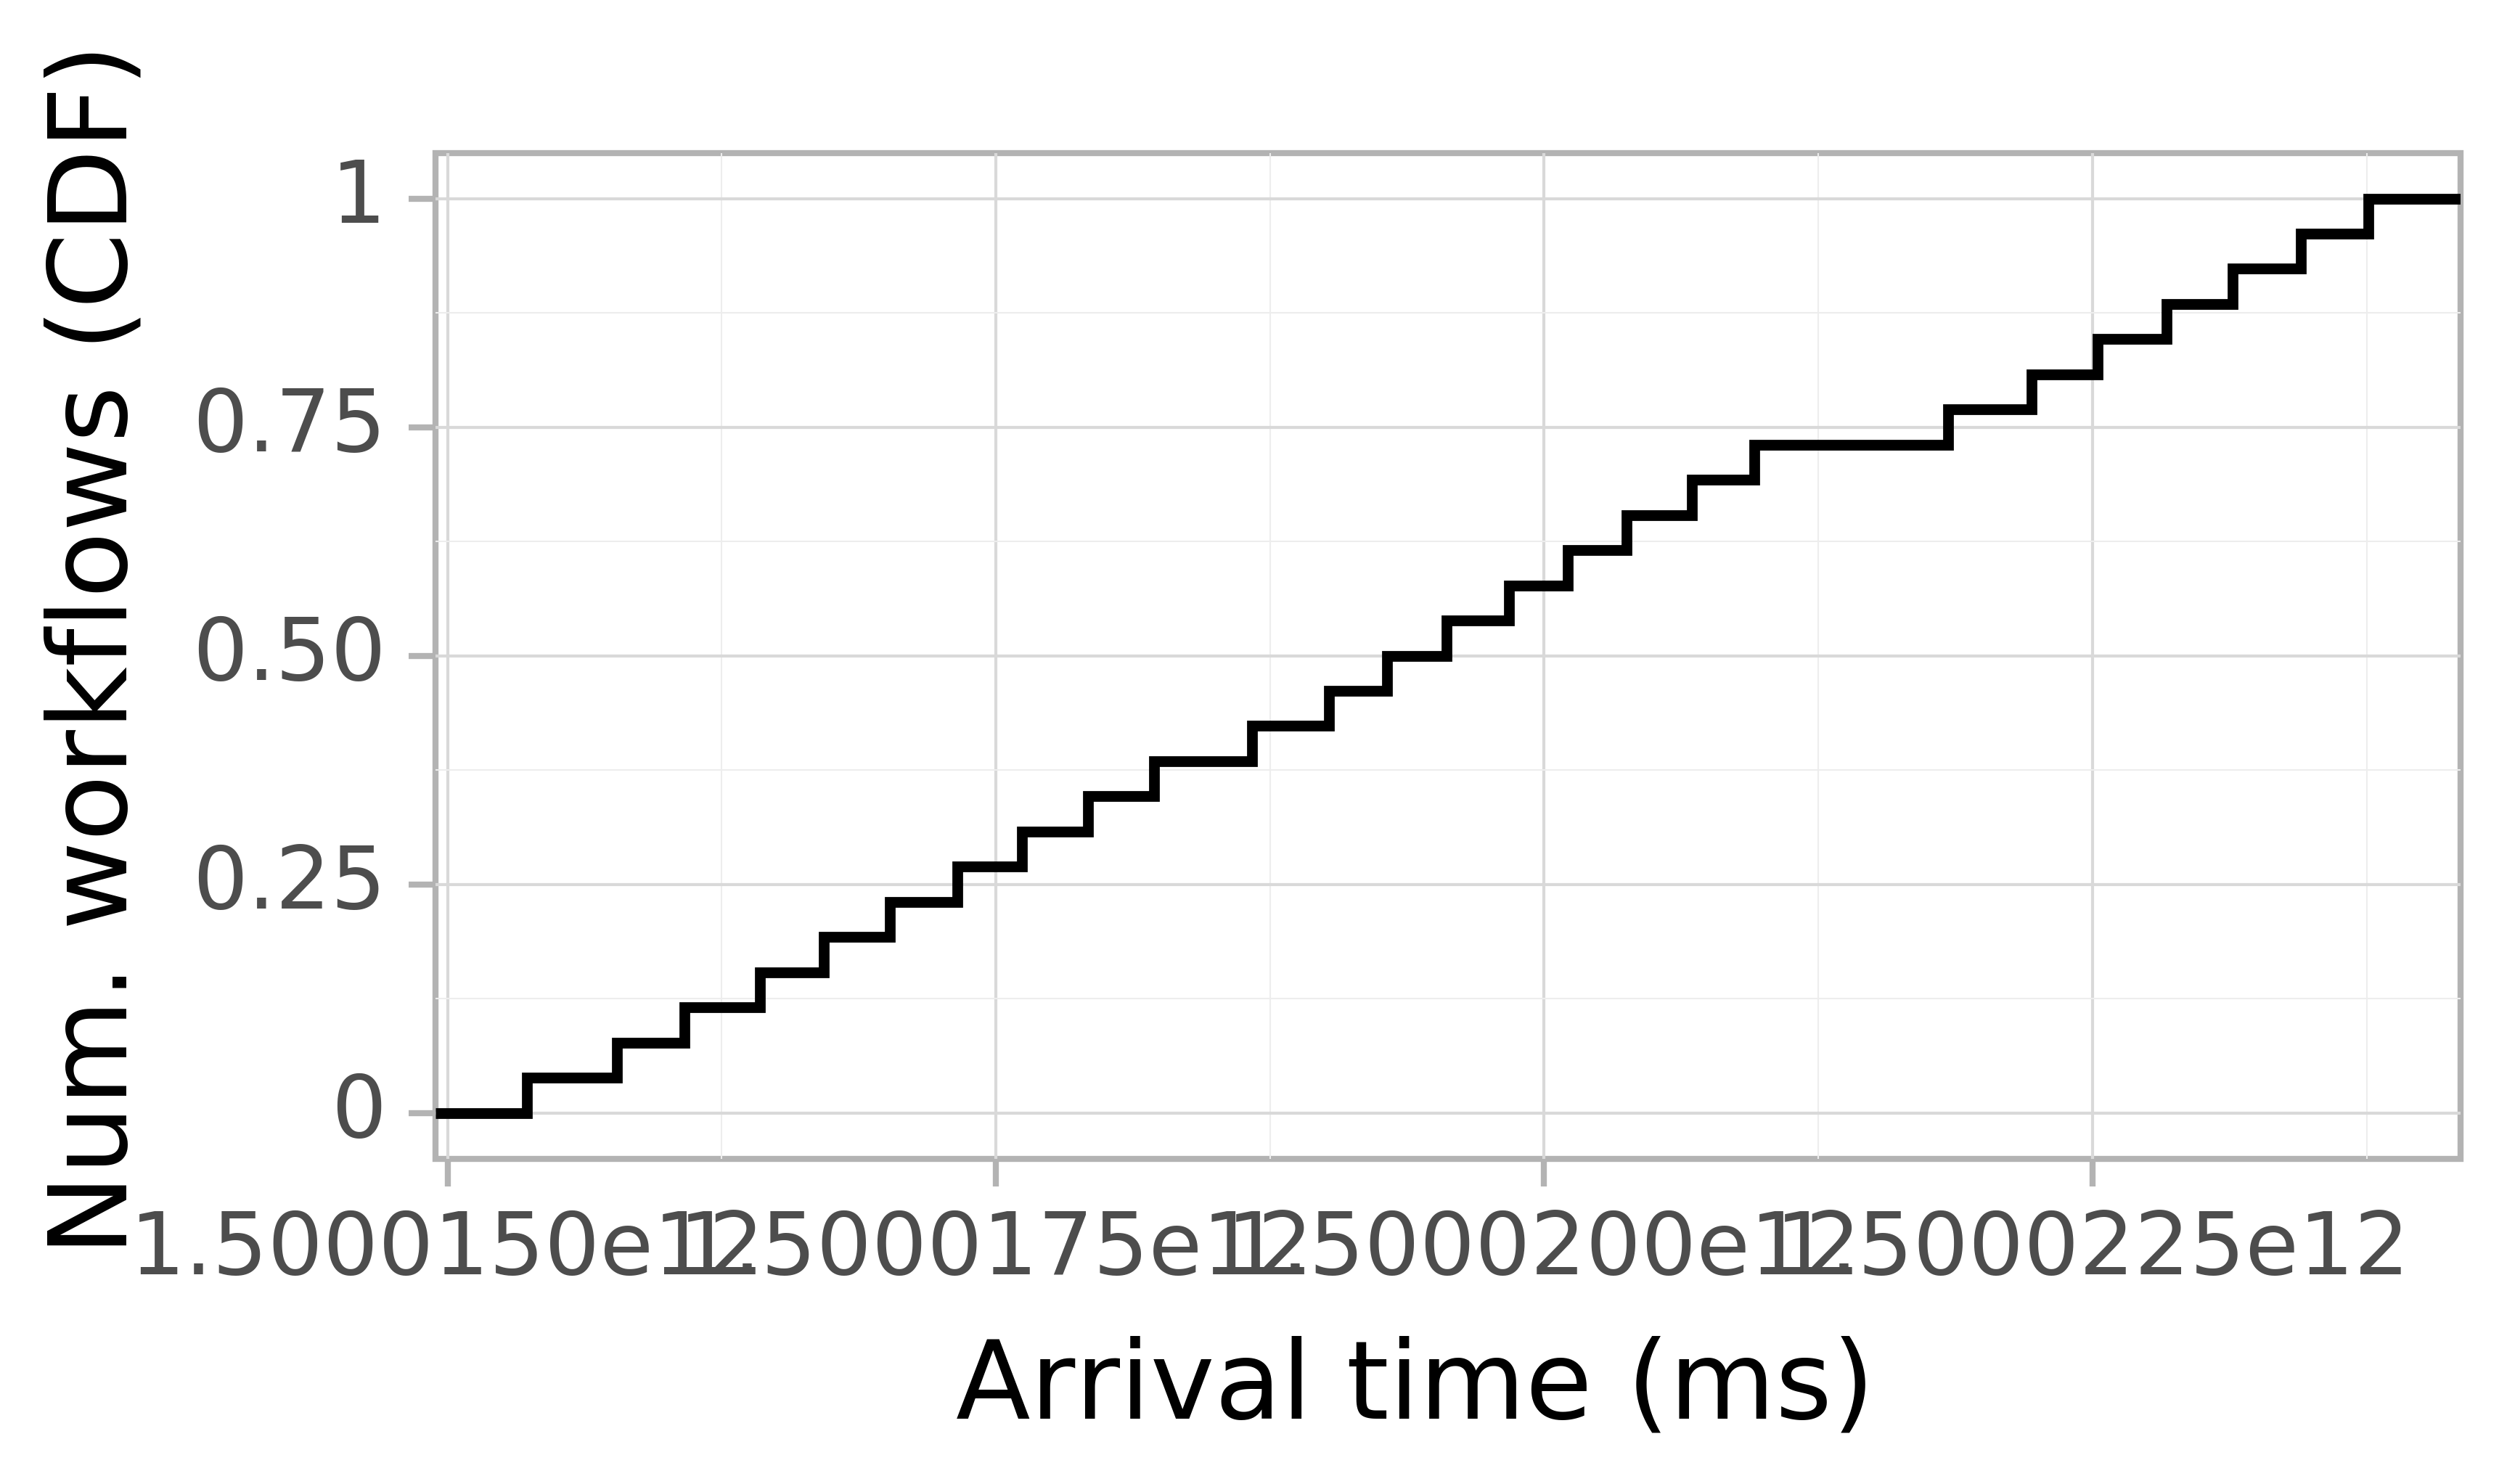 Job arrival CDF graph for the askalon-new_ee29 trace.